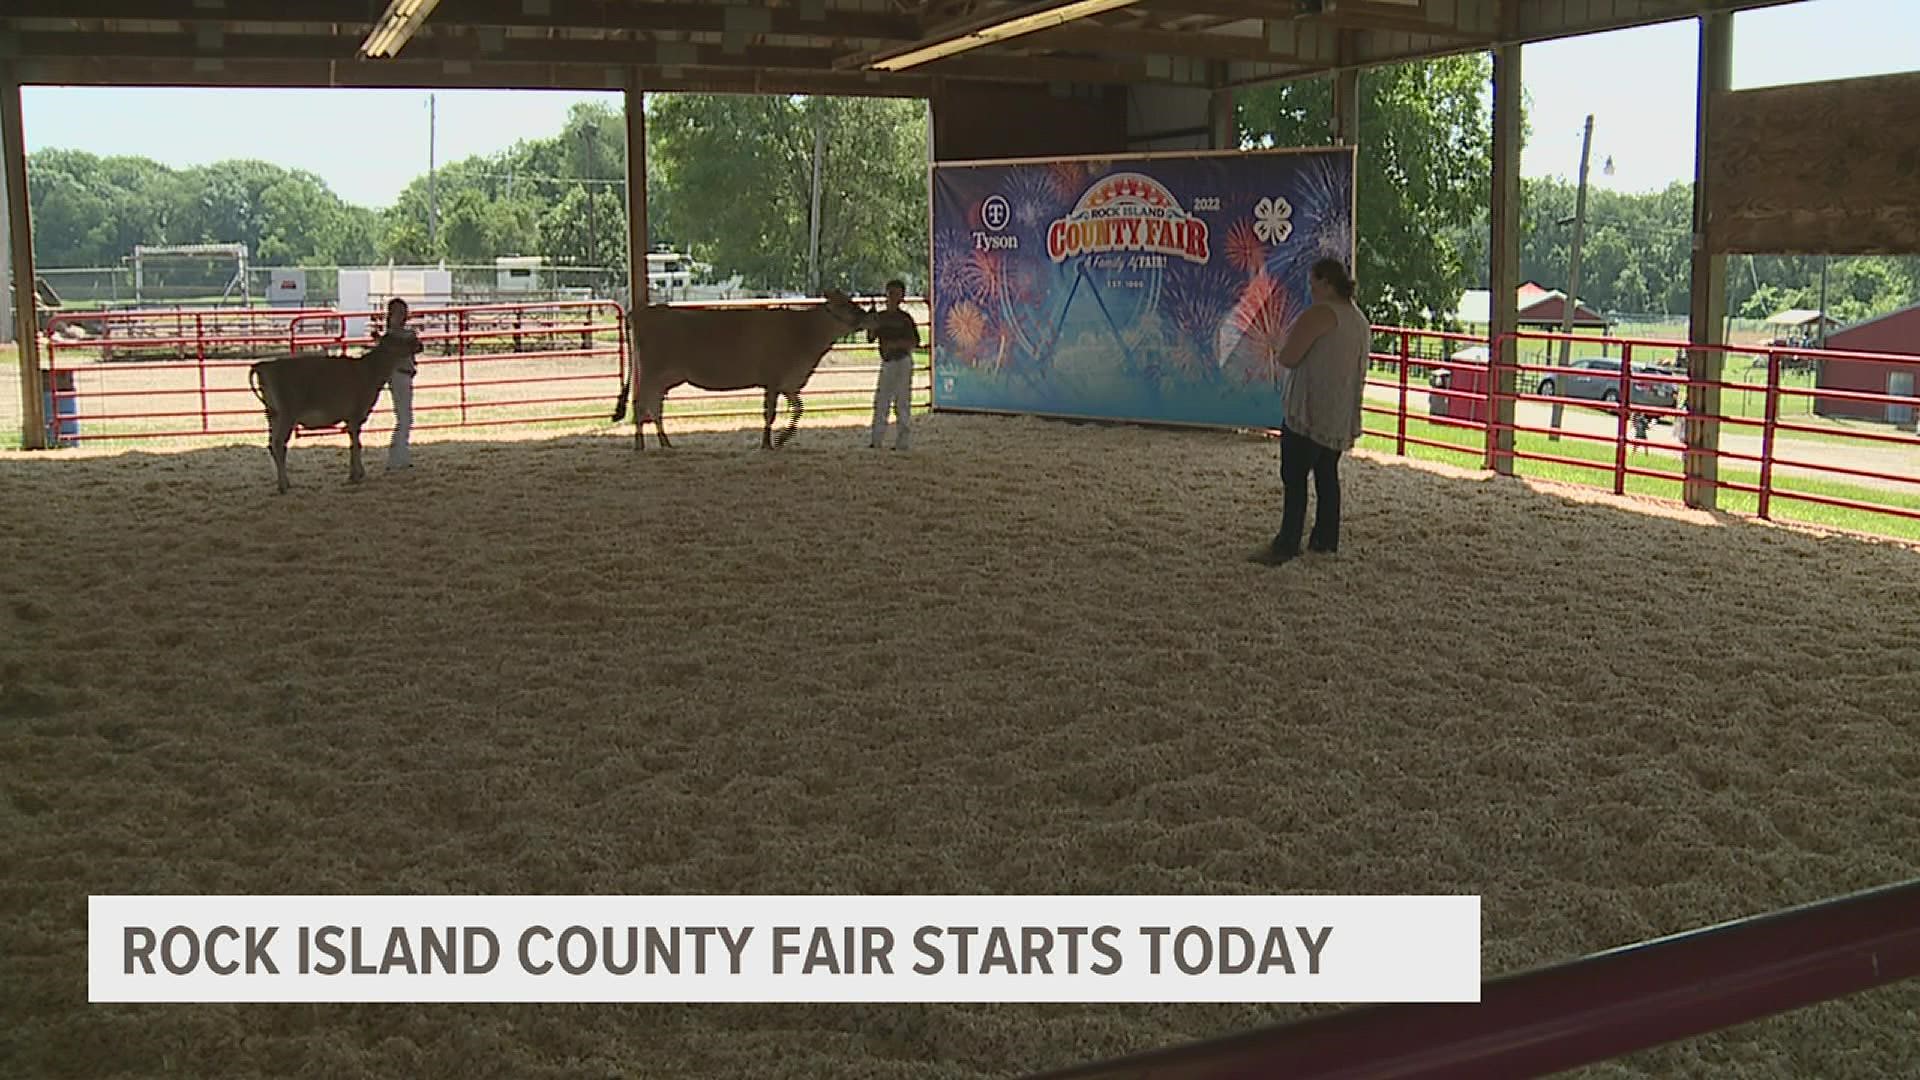 The county fair goes Tuesday through Saturday at the Grandstands in East Moline. Here's what you should know before bringing the family.